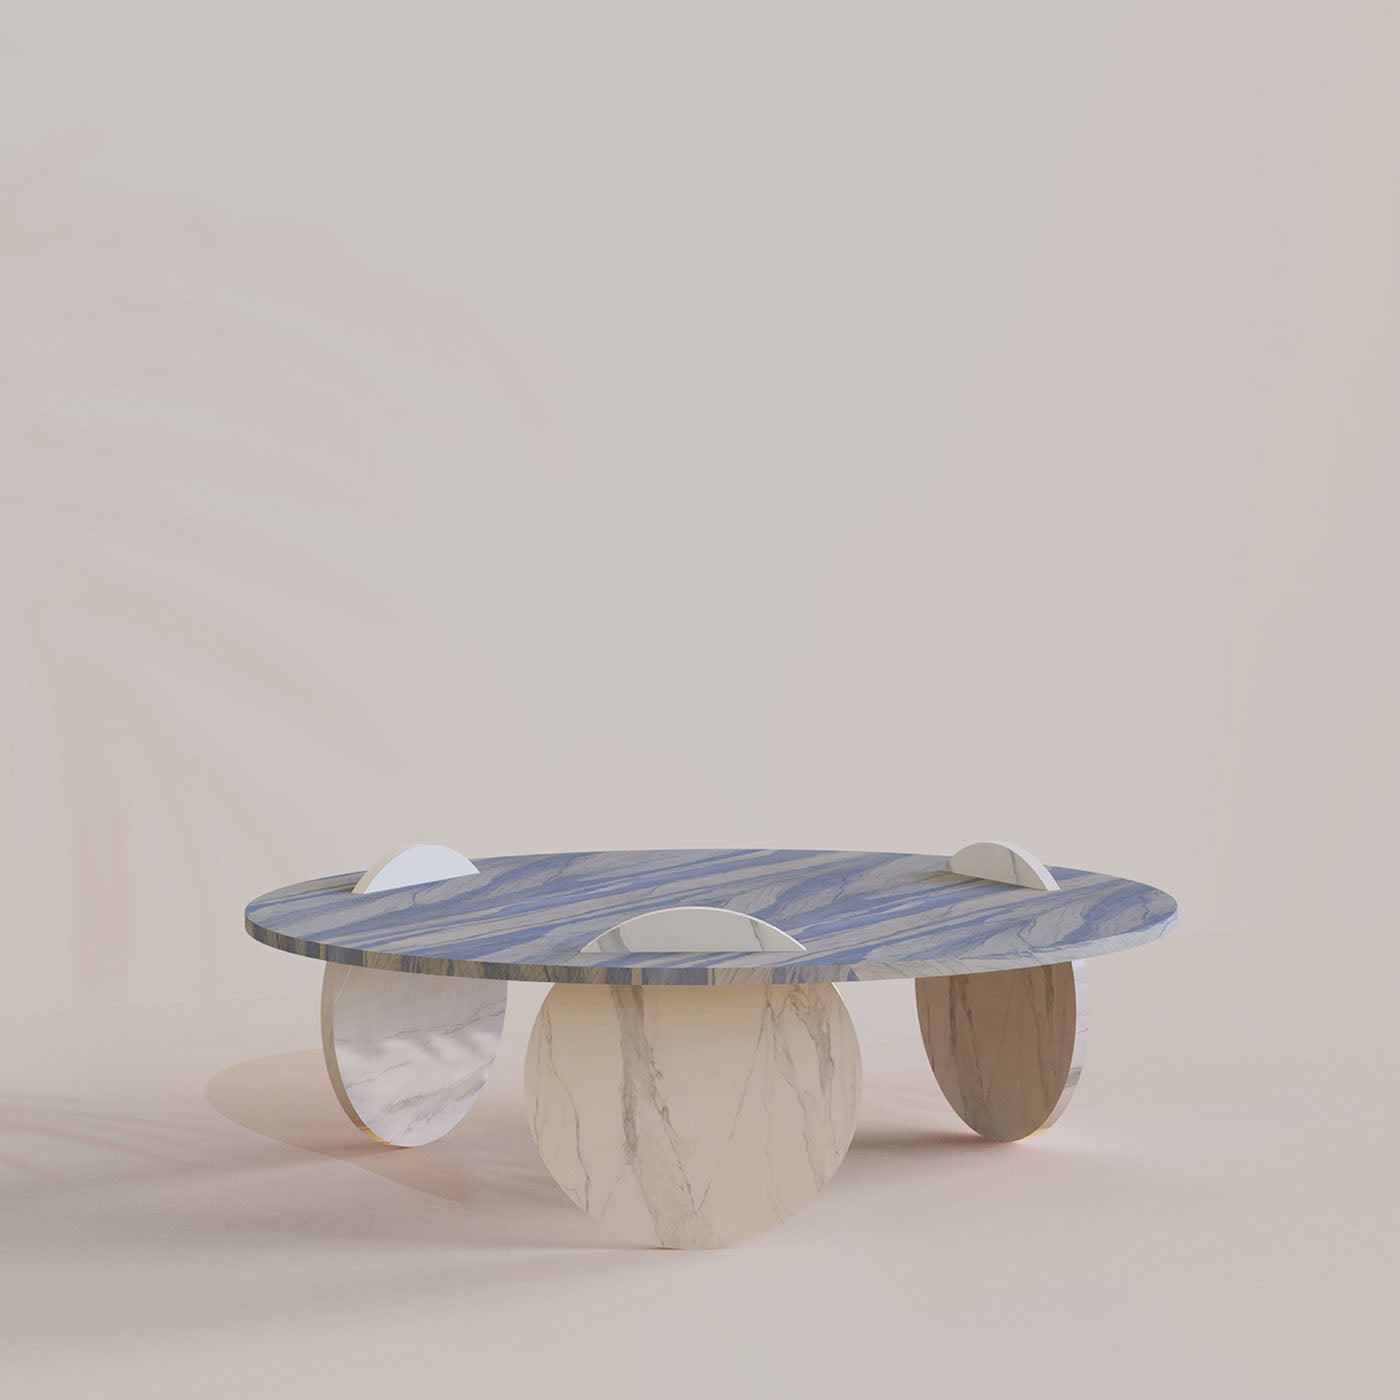 Circus Blue & White Marble Coffee Table by DebonaDemeo - Alternative view 1